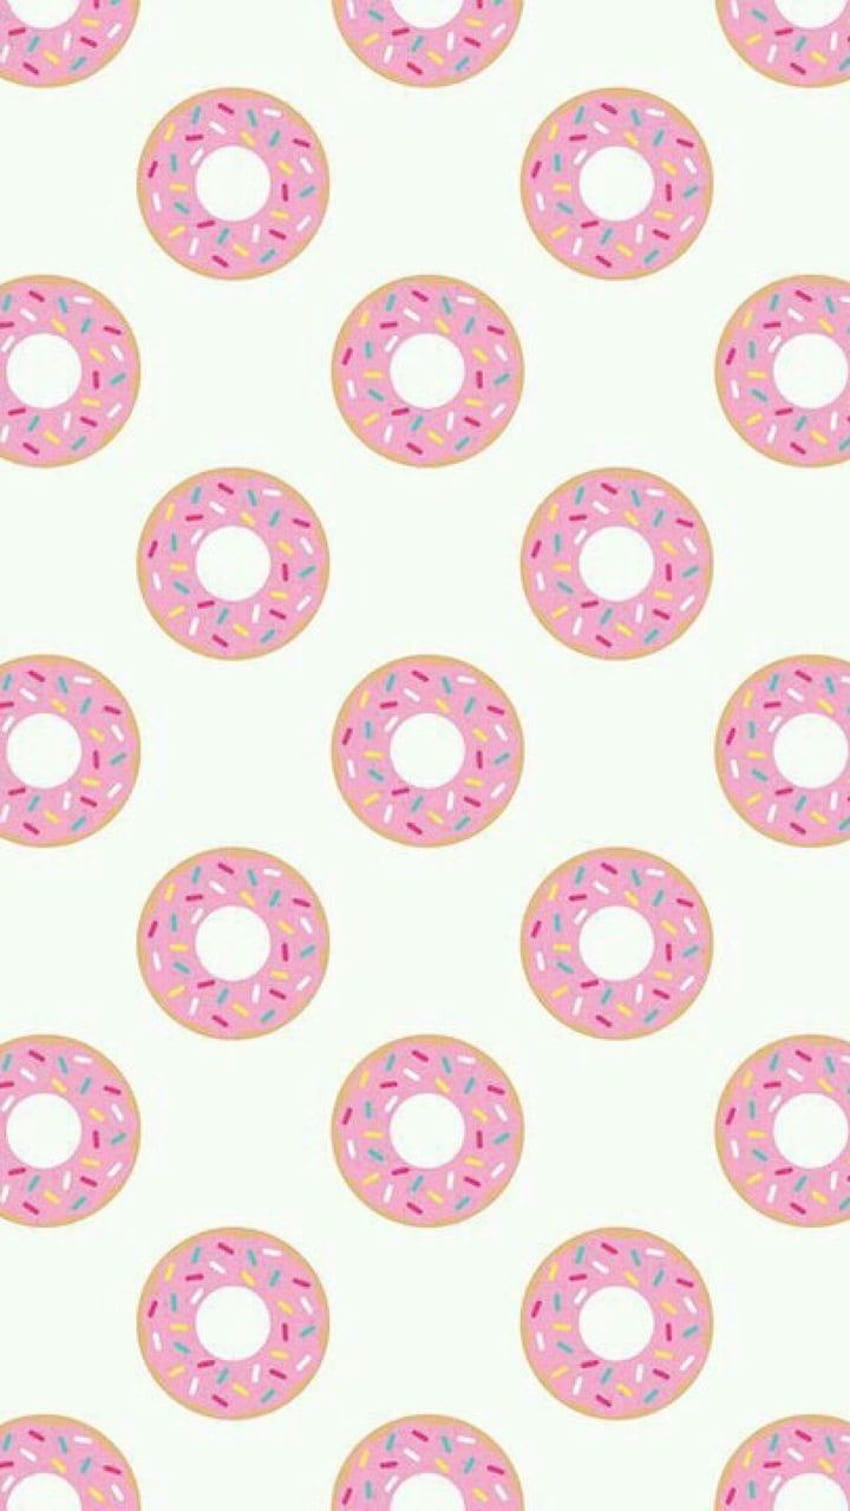 Donut Wallpaper for iPhone 11, Pro Max, X, 8, 7, 6 - Free Download on  3Wallpapers